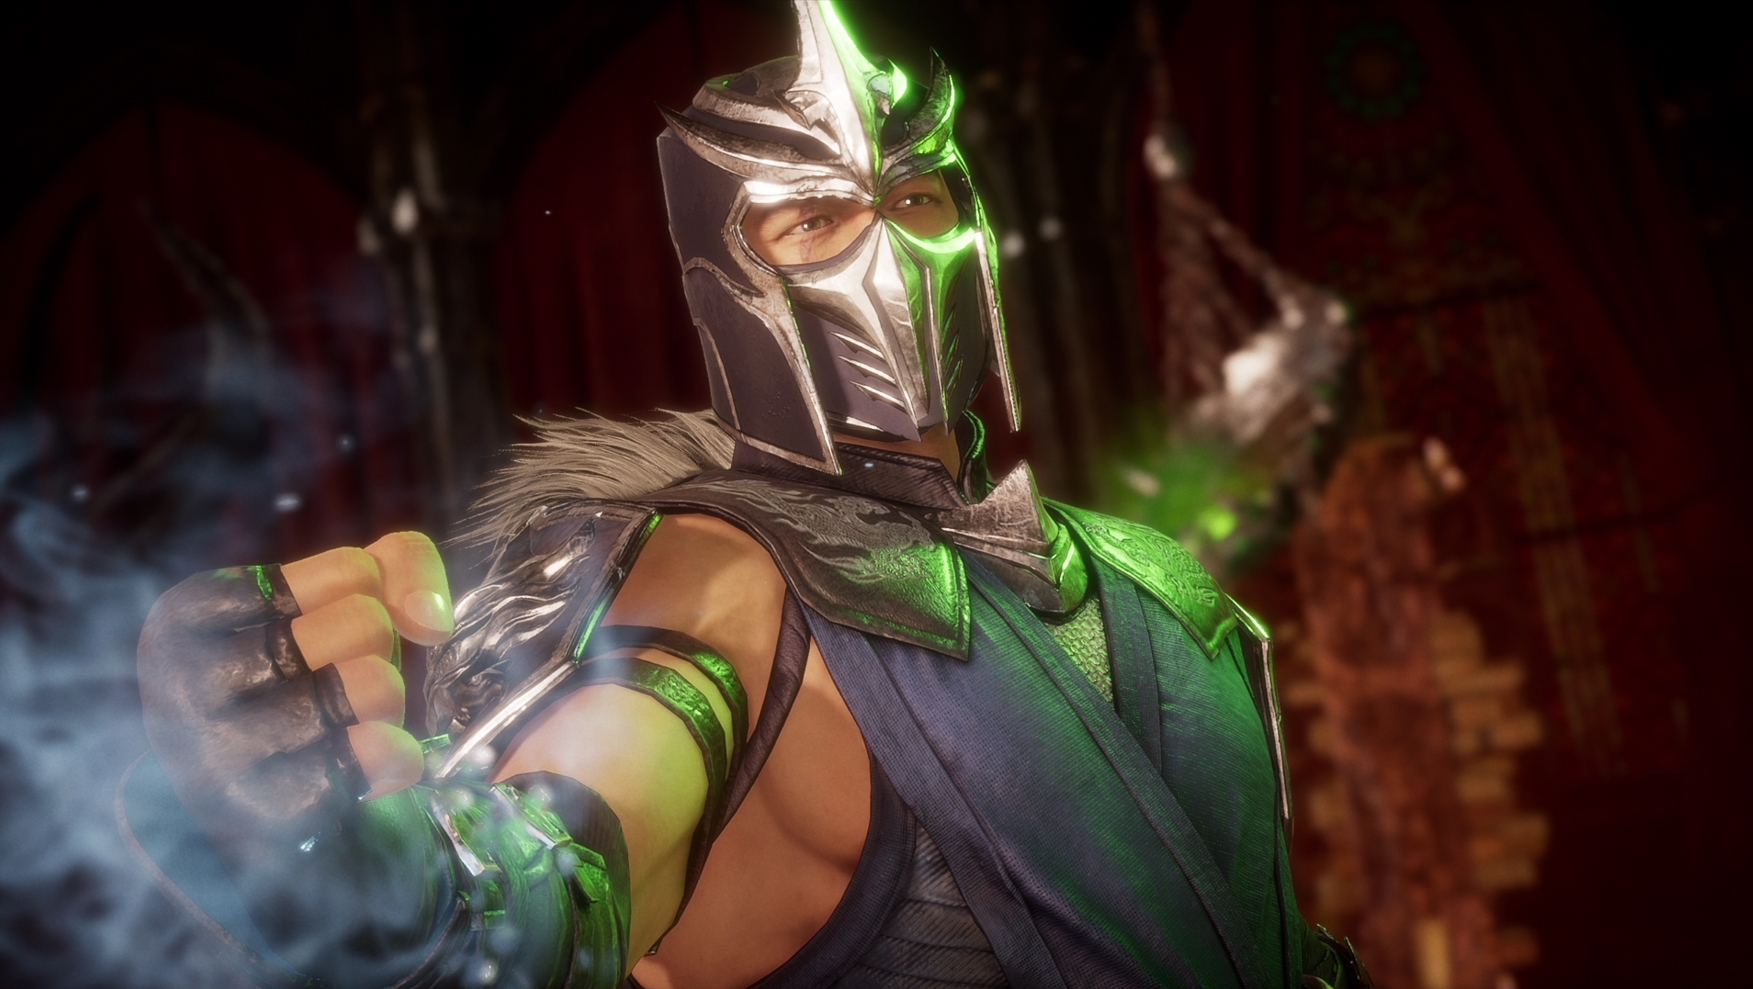 Ed Boon Says NetherRealm's Next Game Is Likely Injustice 3 Or Mortal Kombat  12